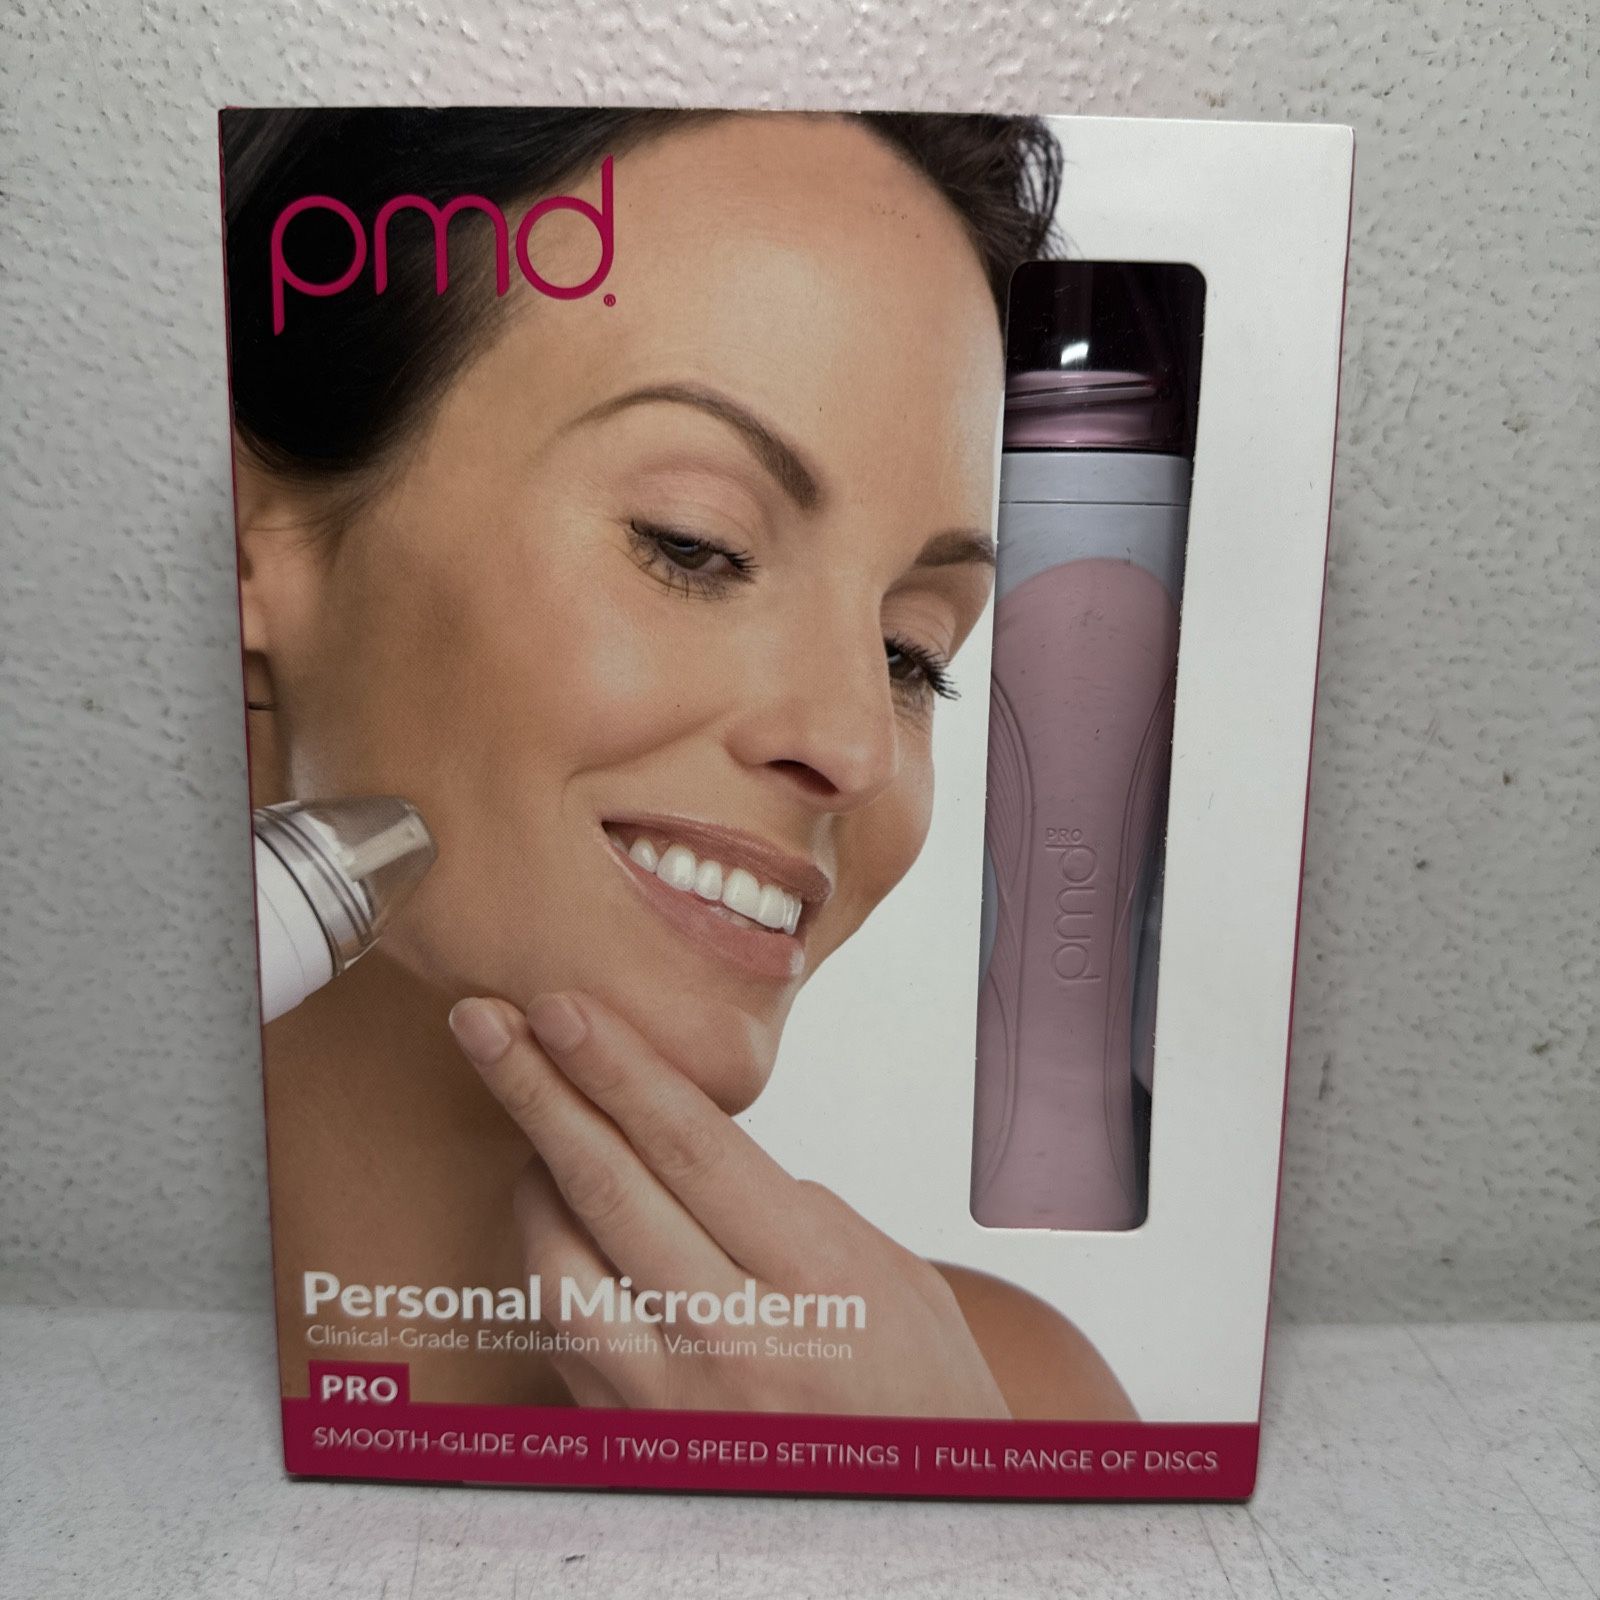 PMD Personal Microderm Pro At-Home Microdermabrasion Device - Blush